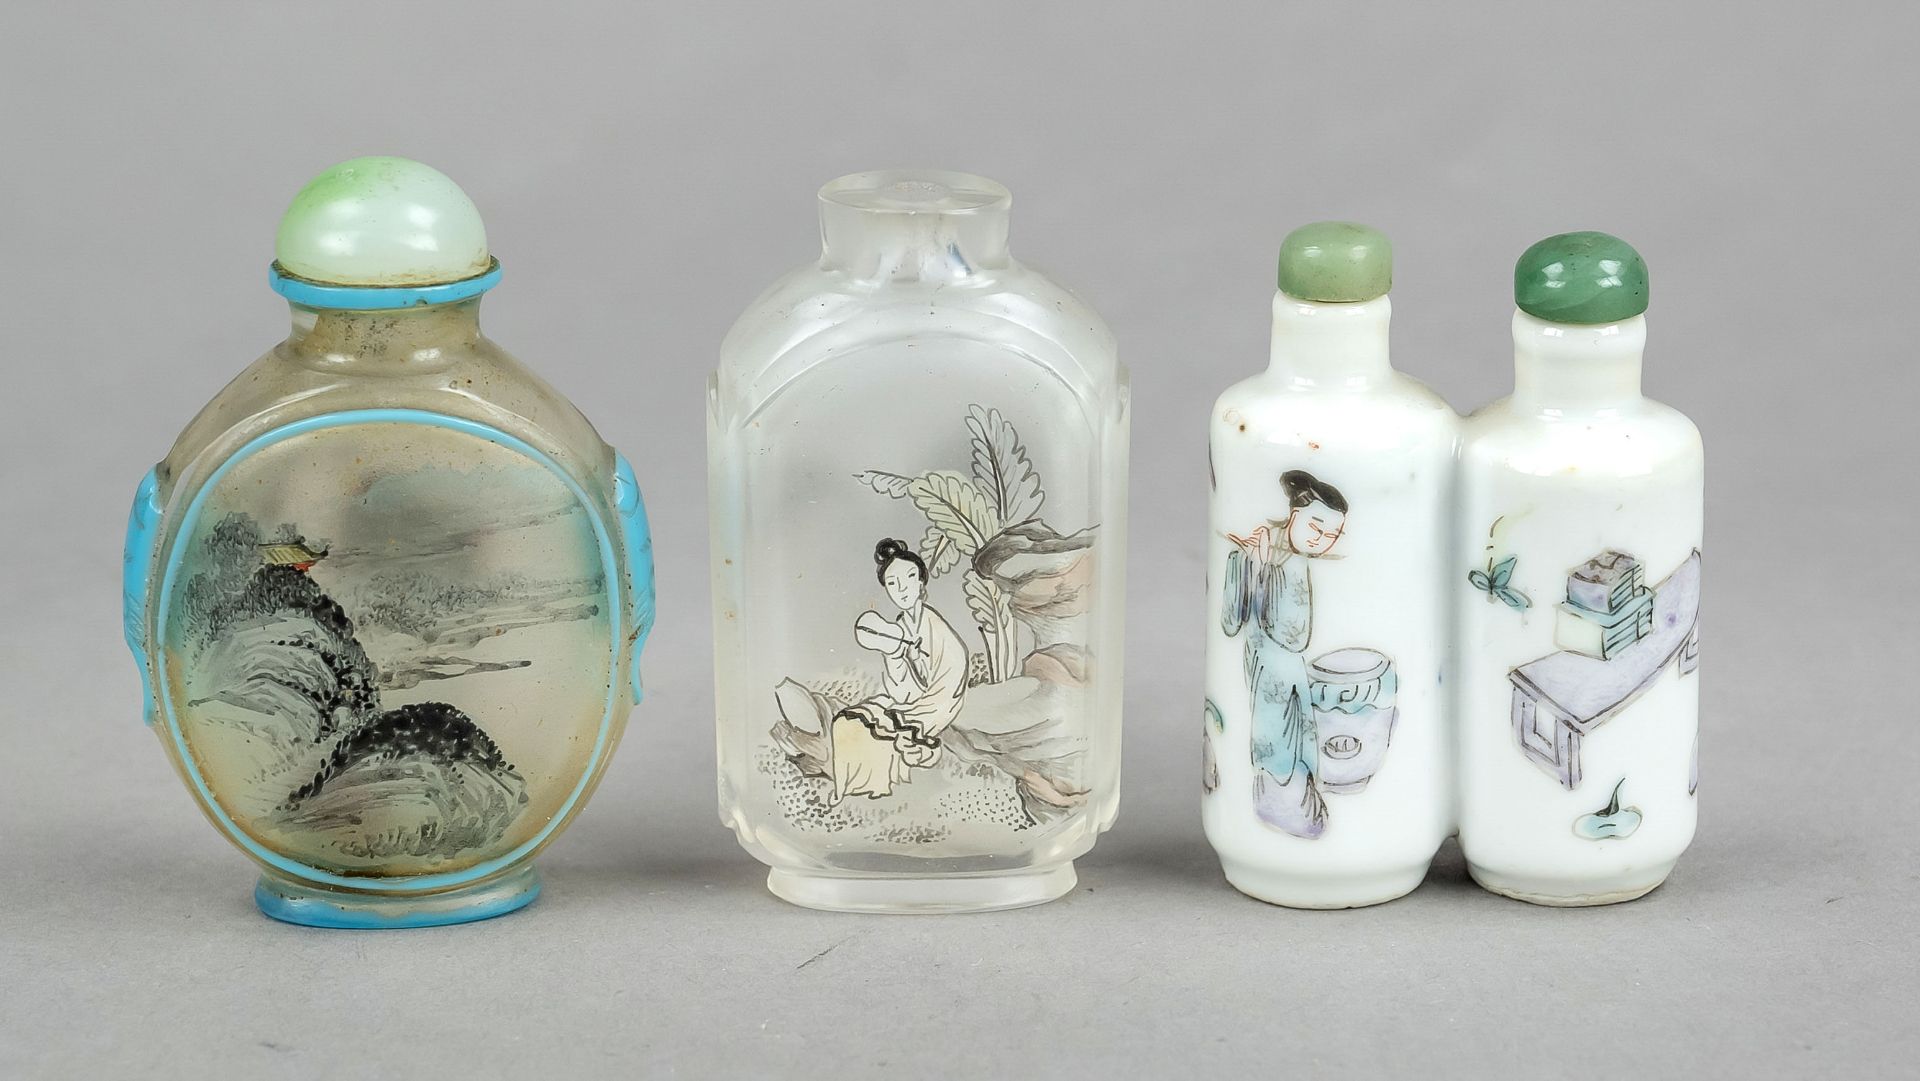 3 Snuffbottles ''Palace ladies and eccentric pair of birds'', China, 19th/20th c., porcelain